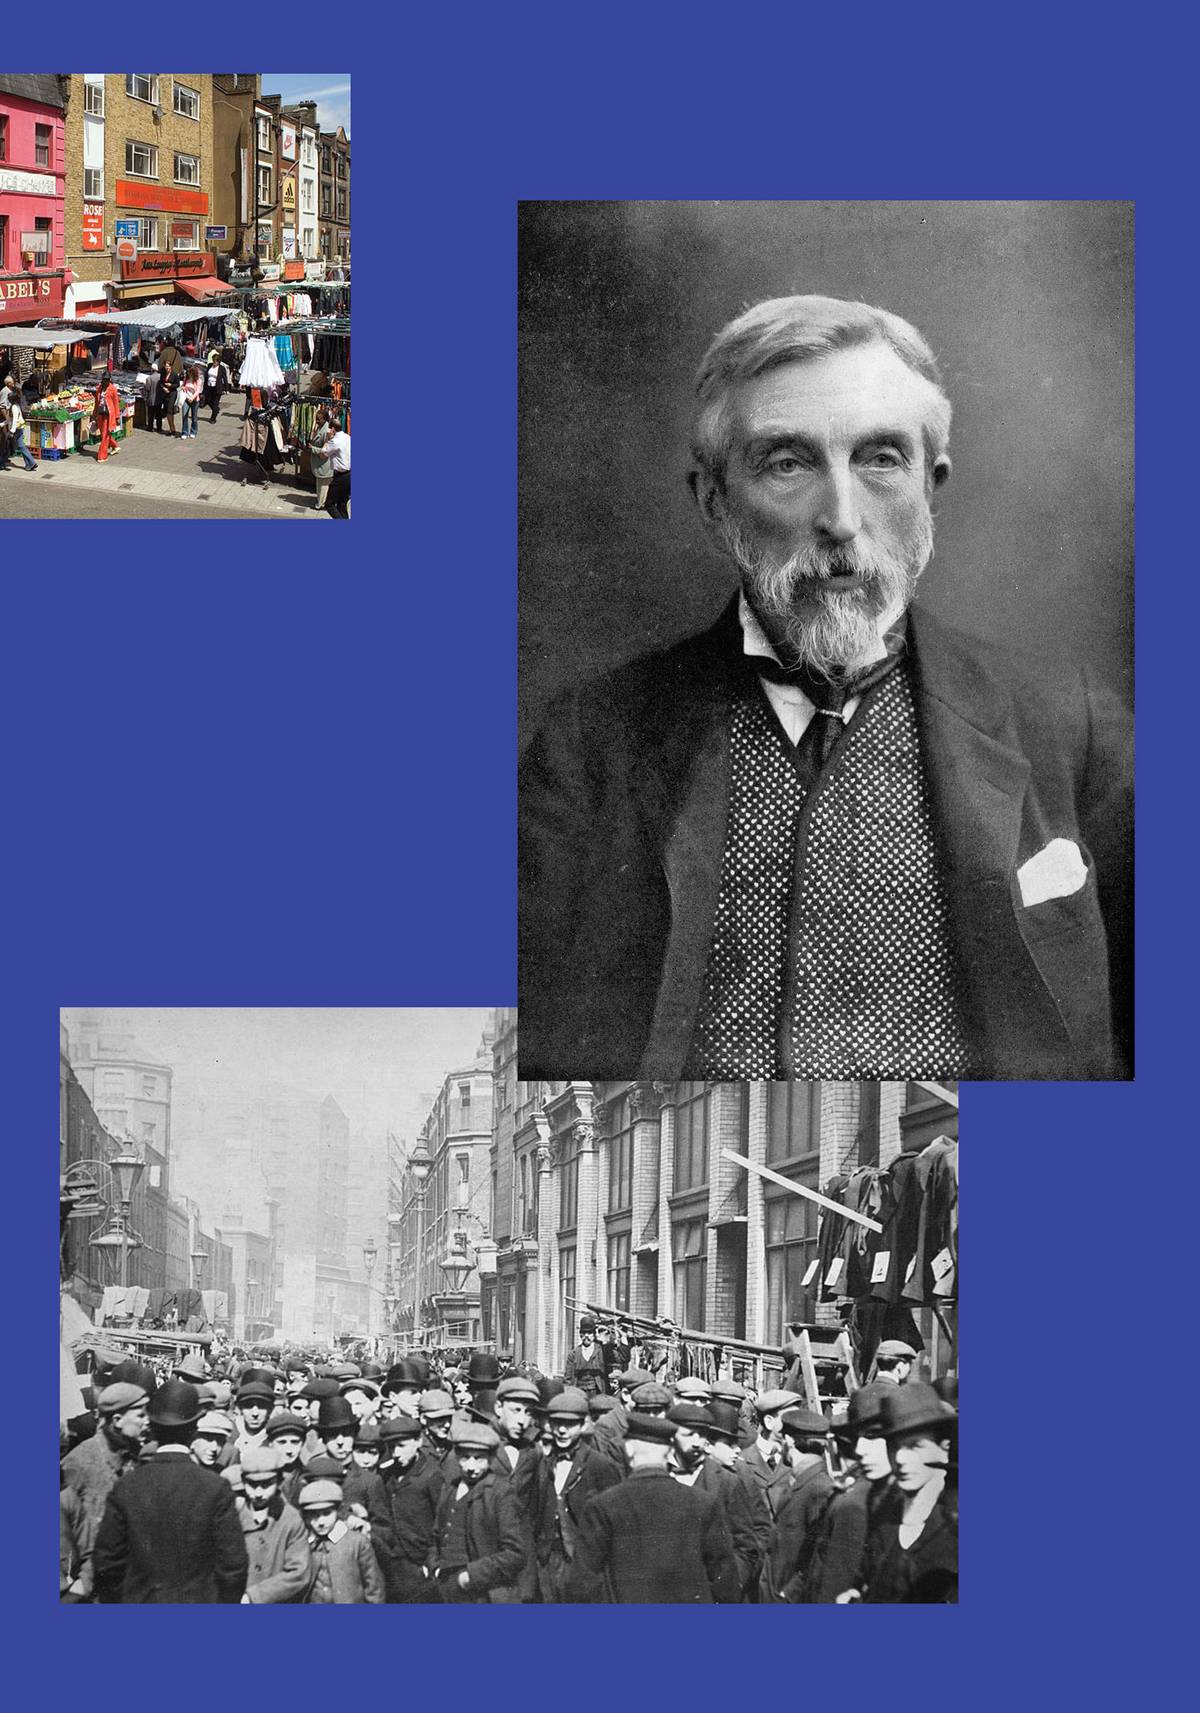 Clockwise from top left: Petticoat Lane in 2006; Charles Booth; Petticoat Lane in the 1920s